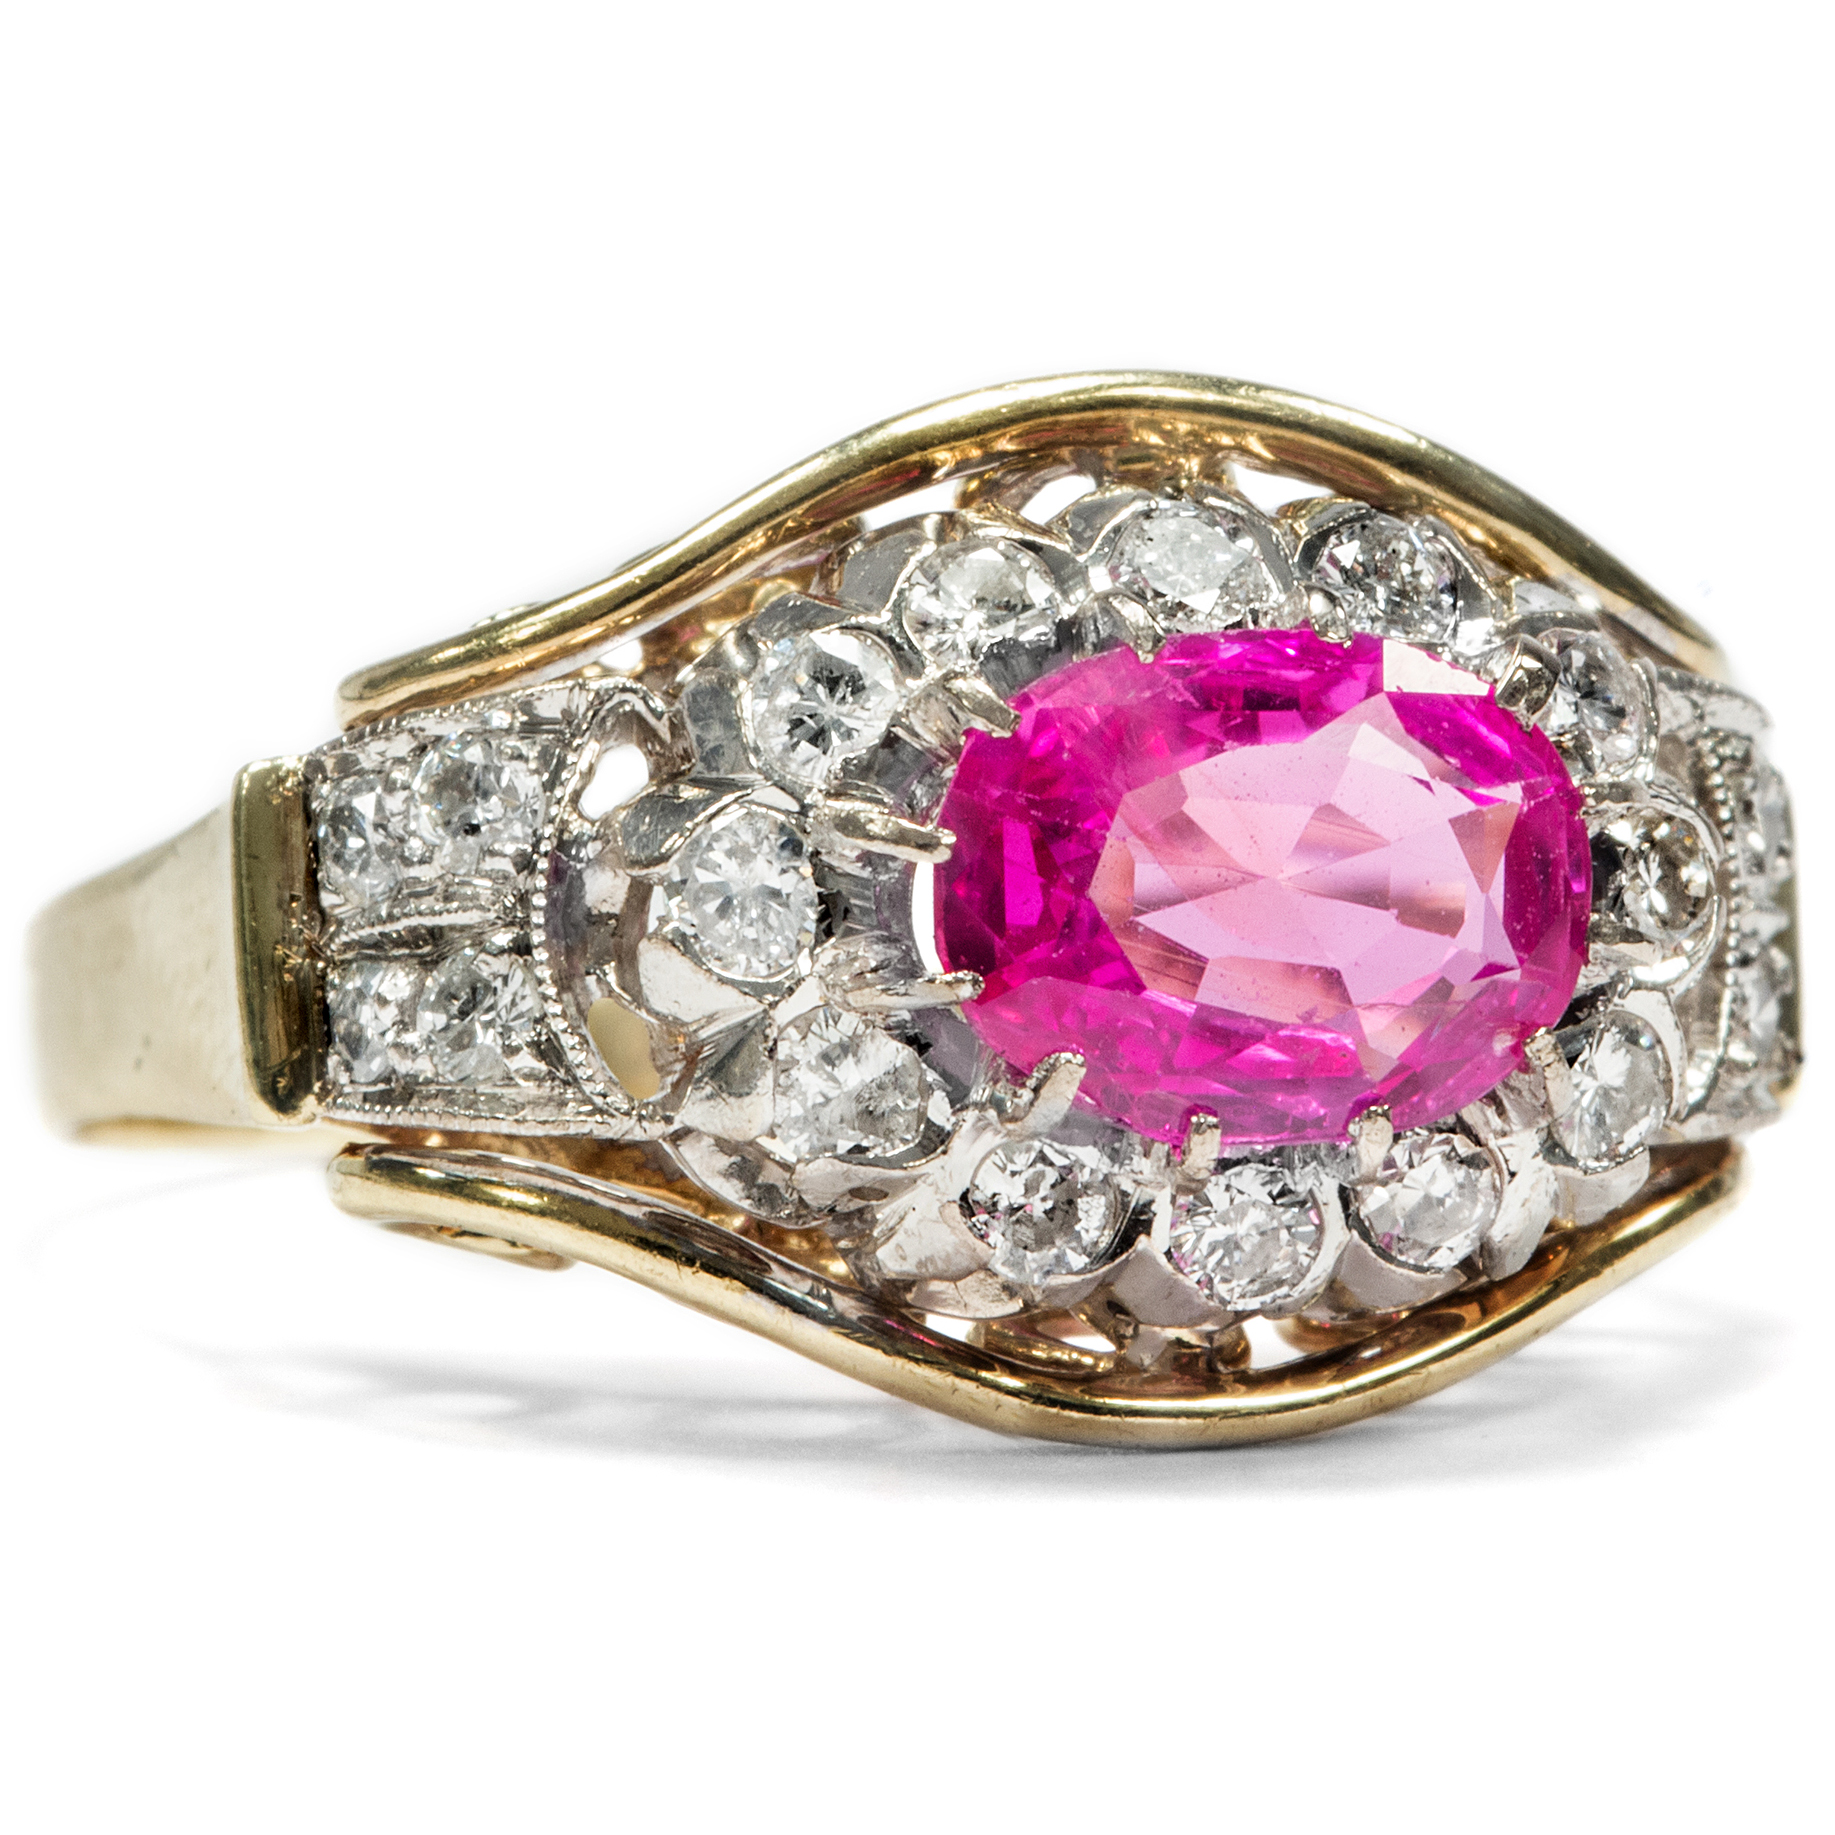 Magnificent Ring with Untreated Burma Pink Sapphire & Diamonds, c. 1955